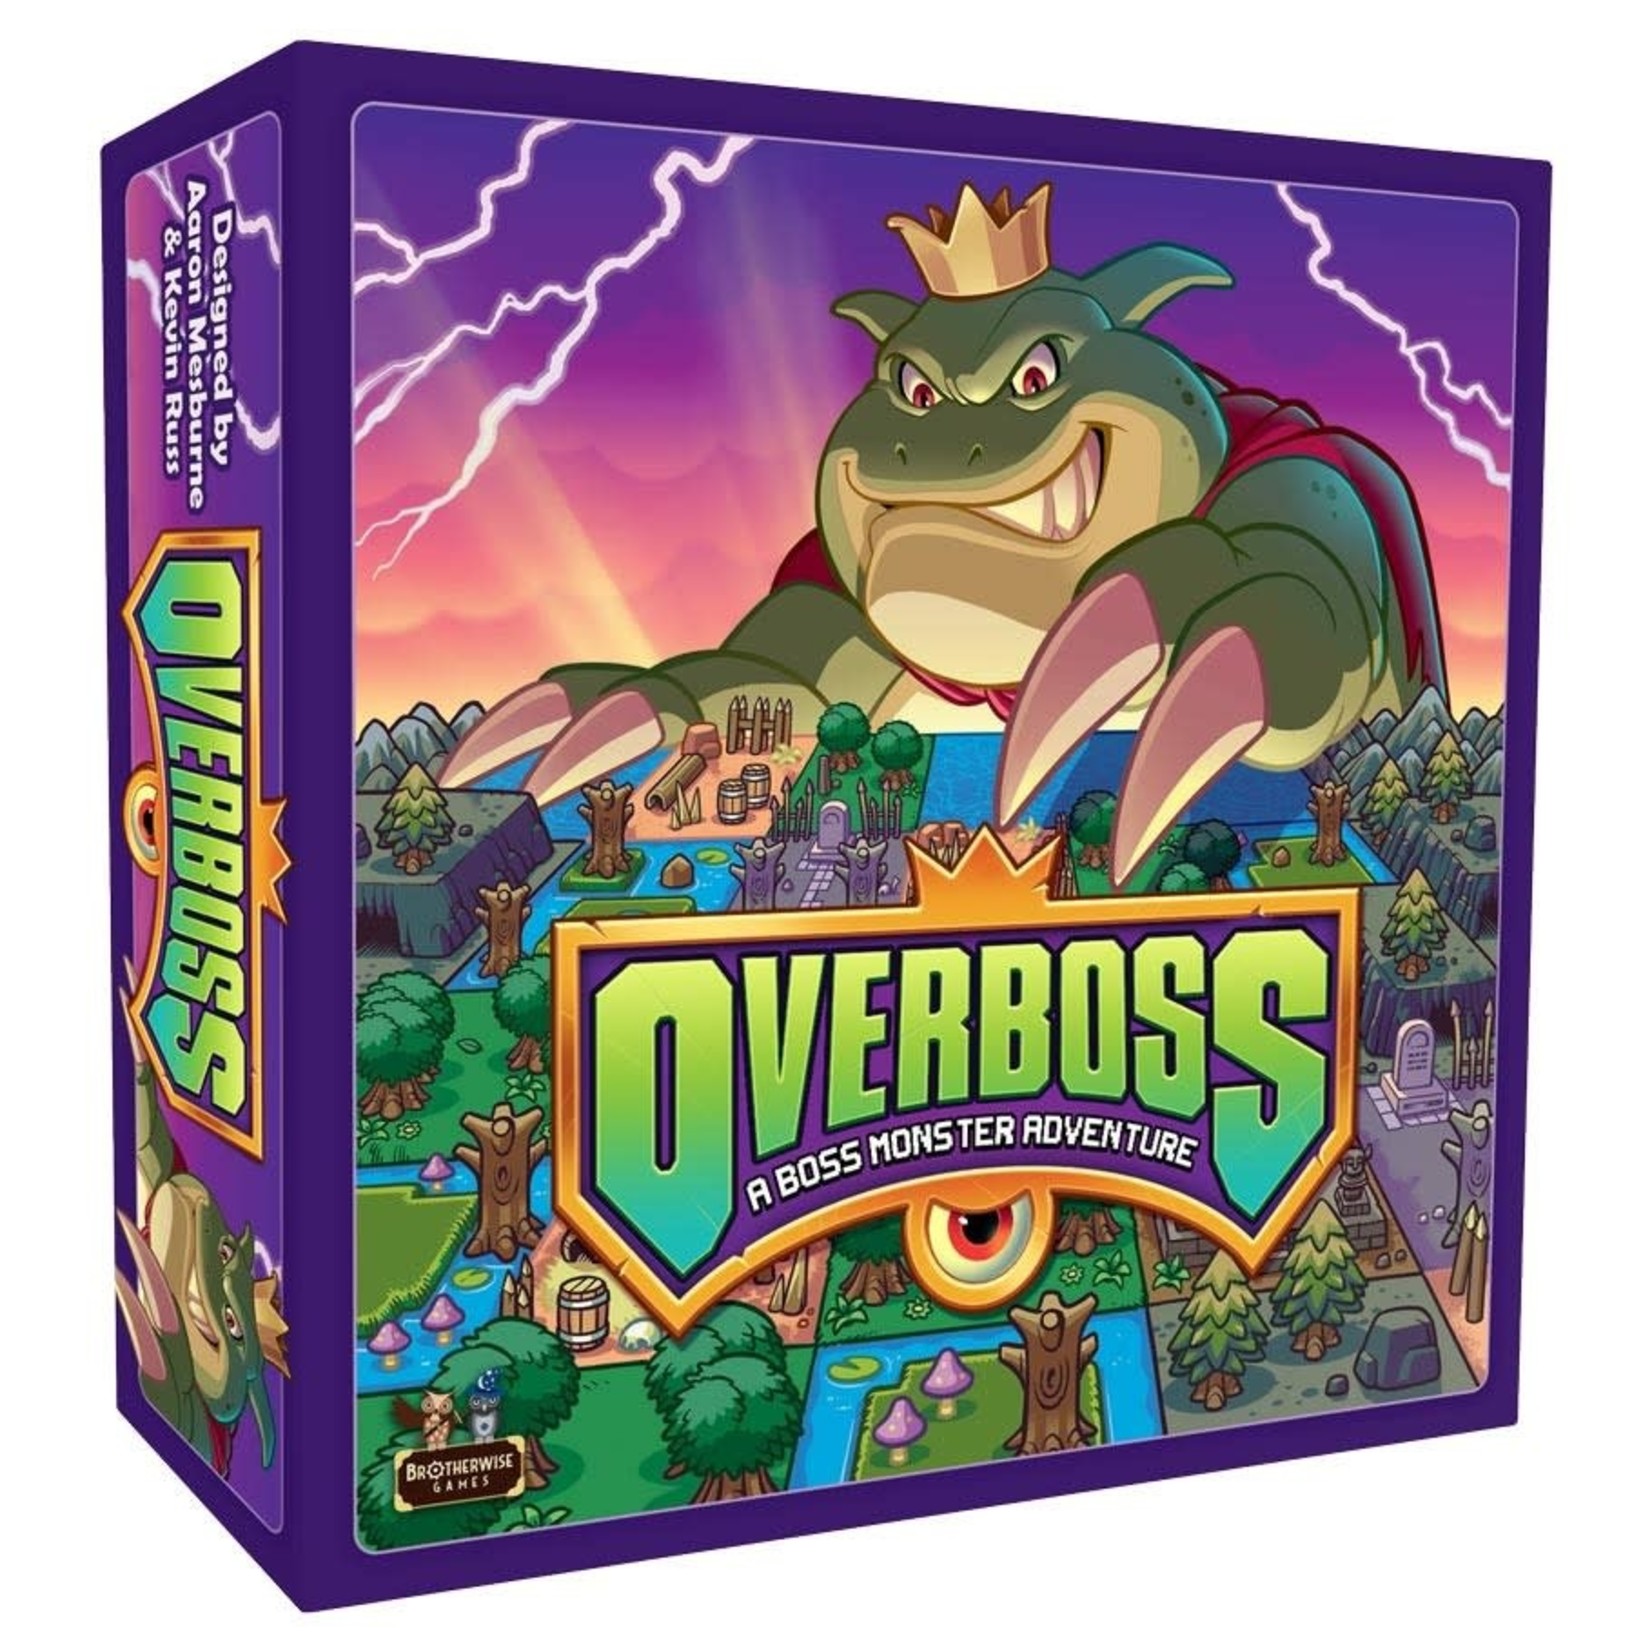 Brotherwise Games, LLC Overboss: A Boss Monster Adventure